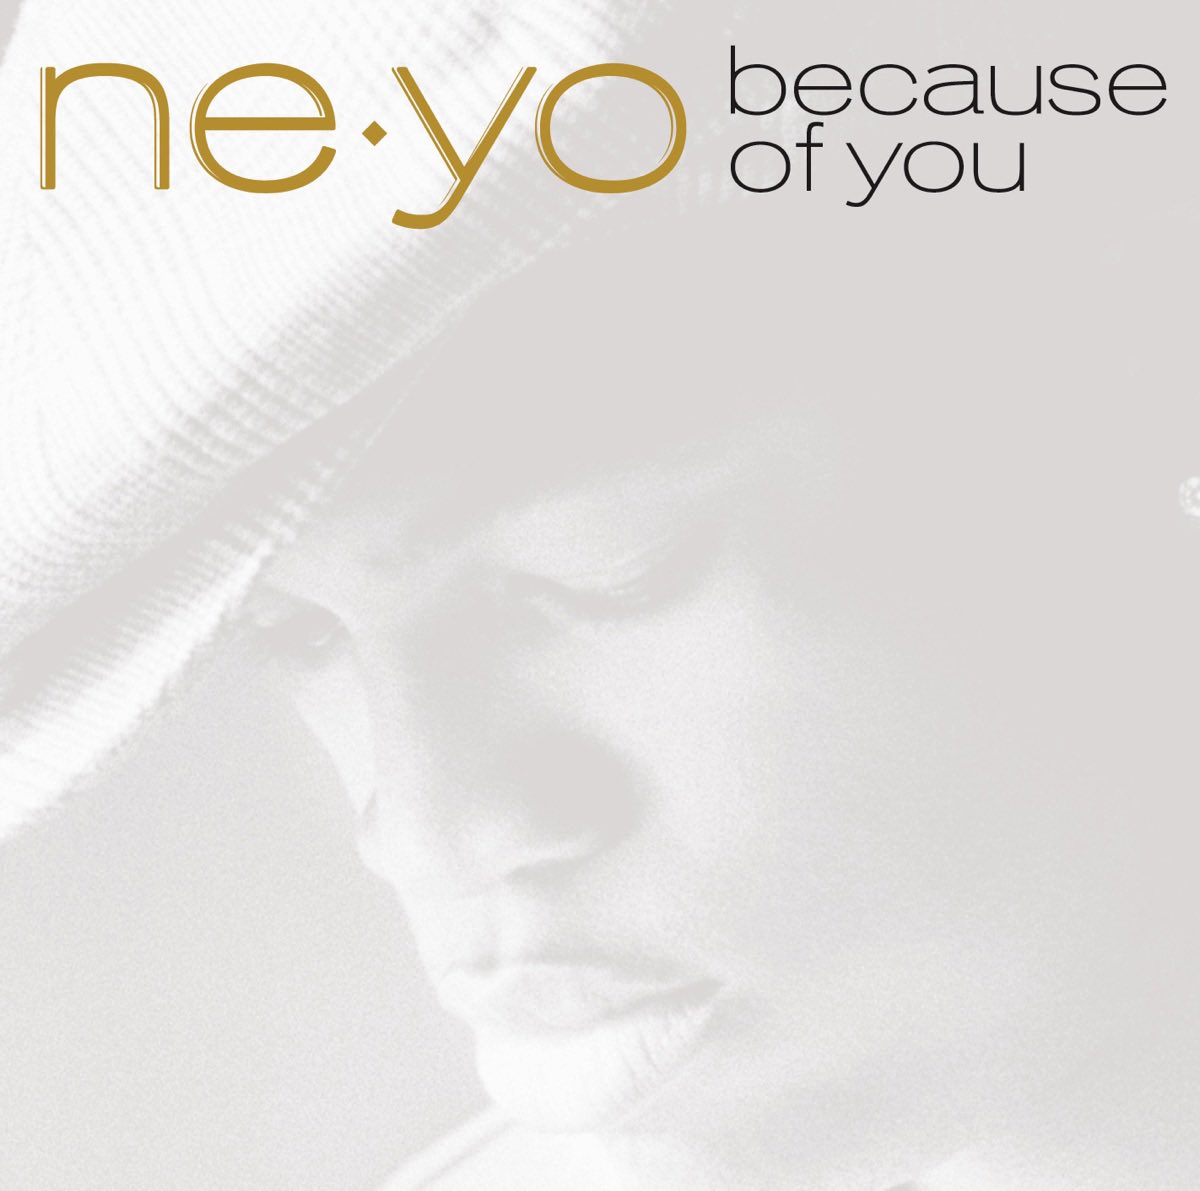 Happy 17th birthday to Ne-Yo’s sophomore album “Because Of You,” released on May 1, 2007!

What were the most slept-on songs on this album to you?

#NeYo #BecauseOfYou #BecauseOfYou17 #SoulBounce